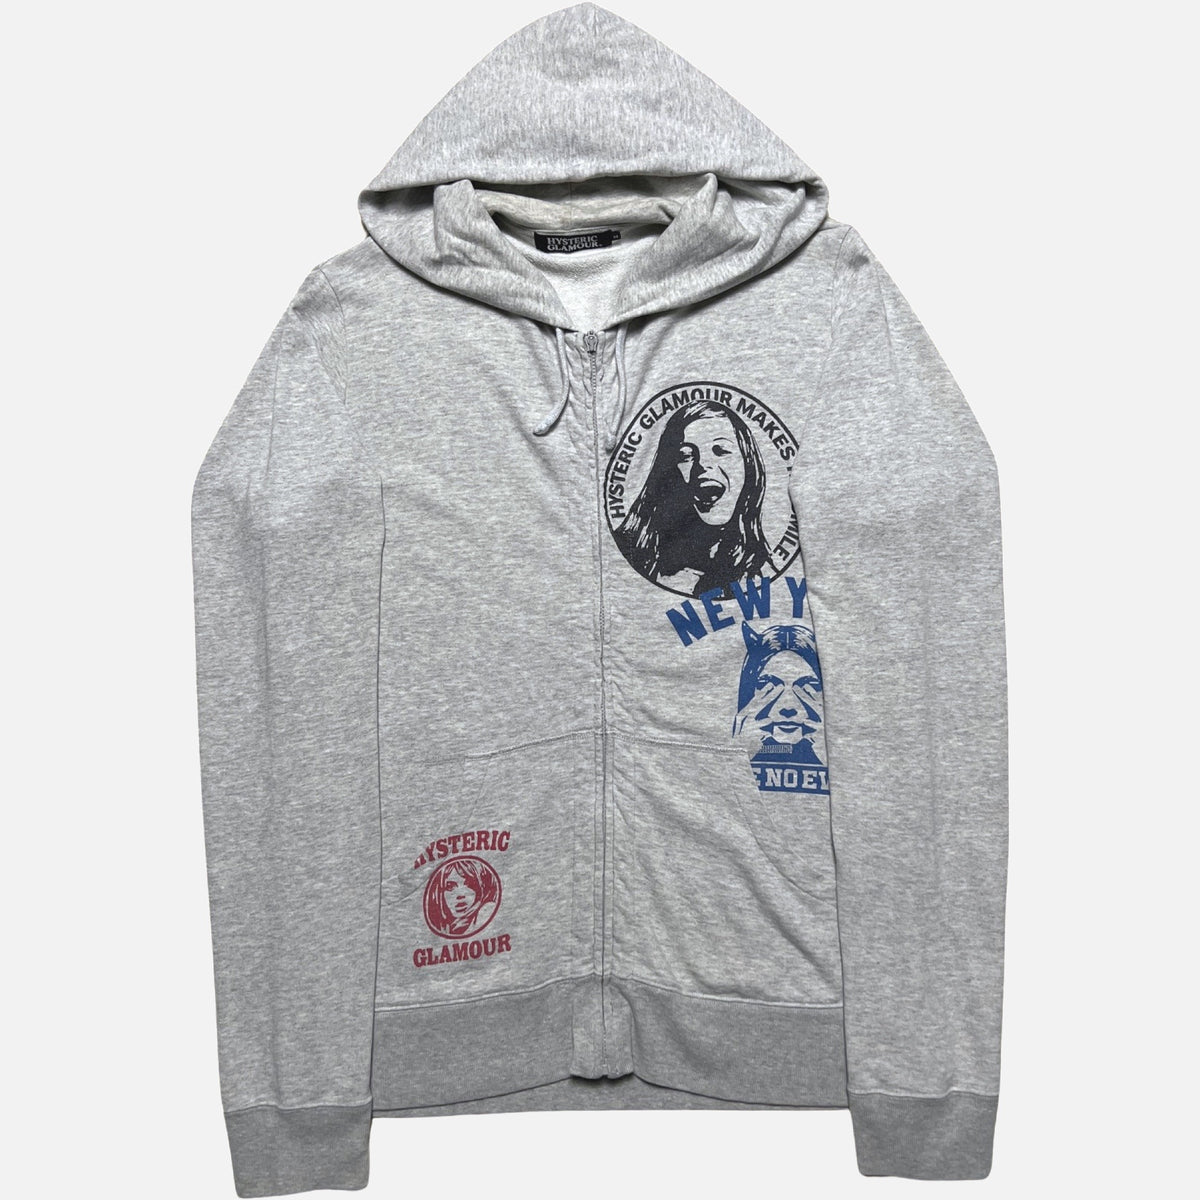 HYSTERIC GLAMOUR HOODIE [M] – 2K DEPT.